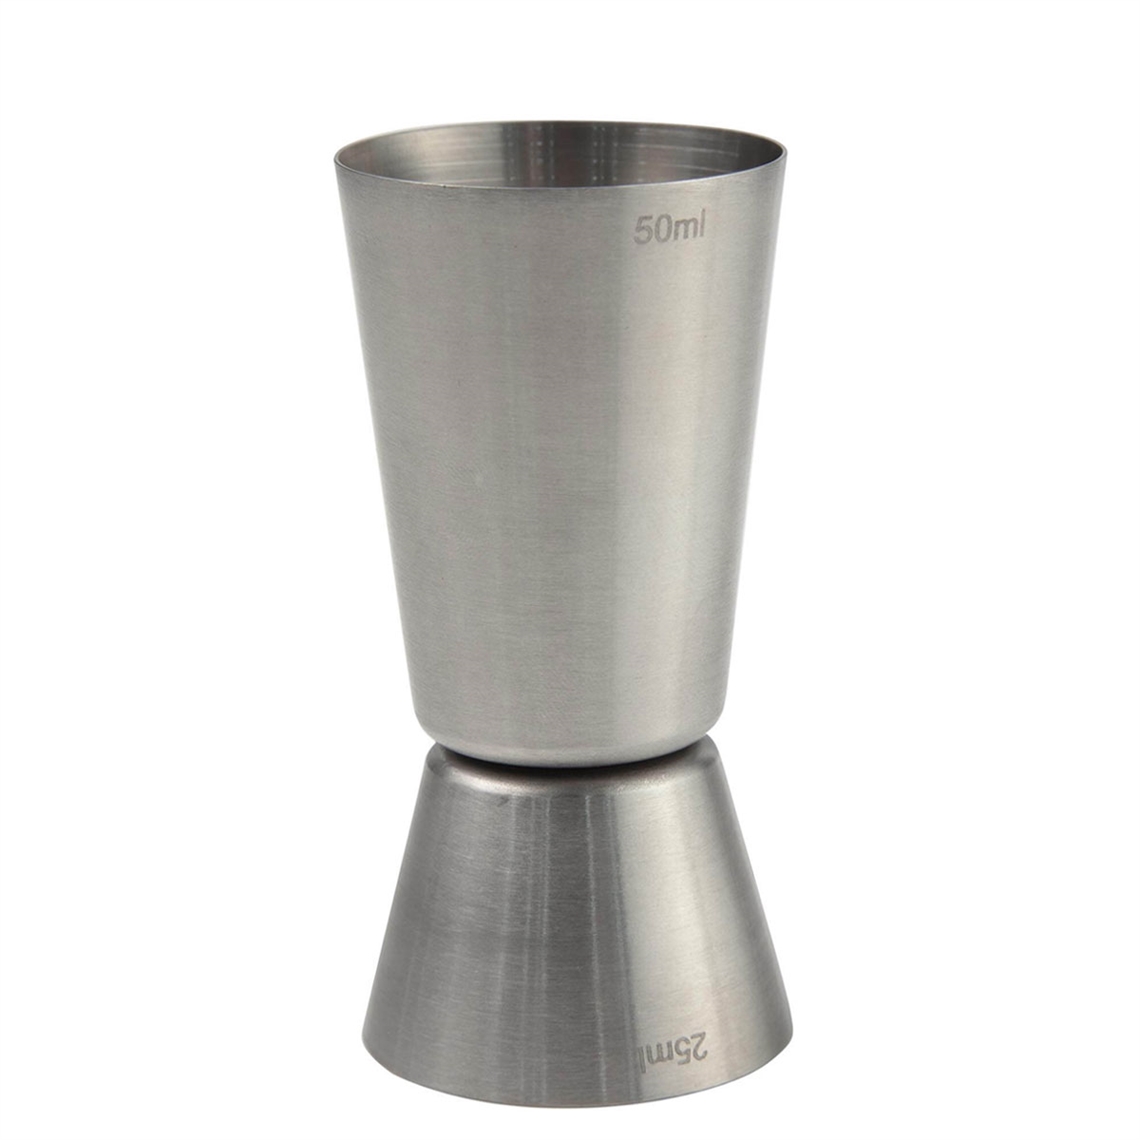 View more glass cleaning accessories from our Spirit and Wine Bar Thimble Measures range